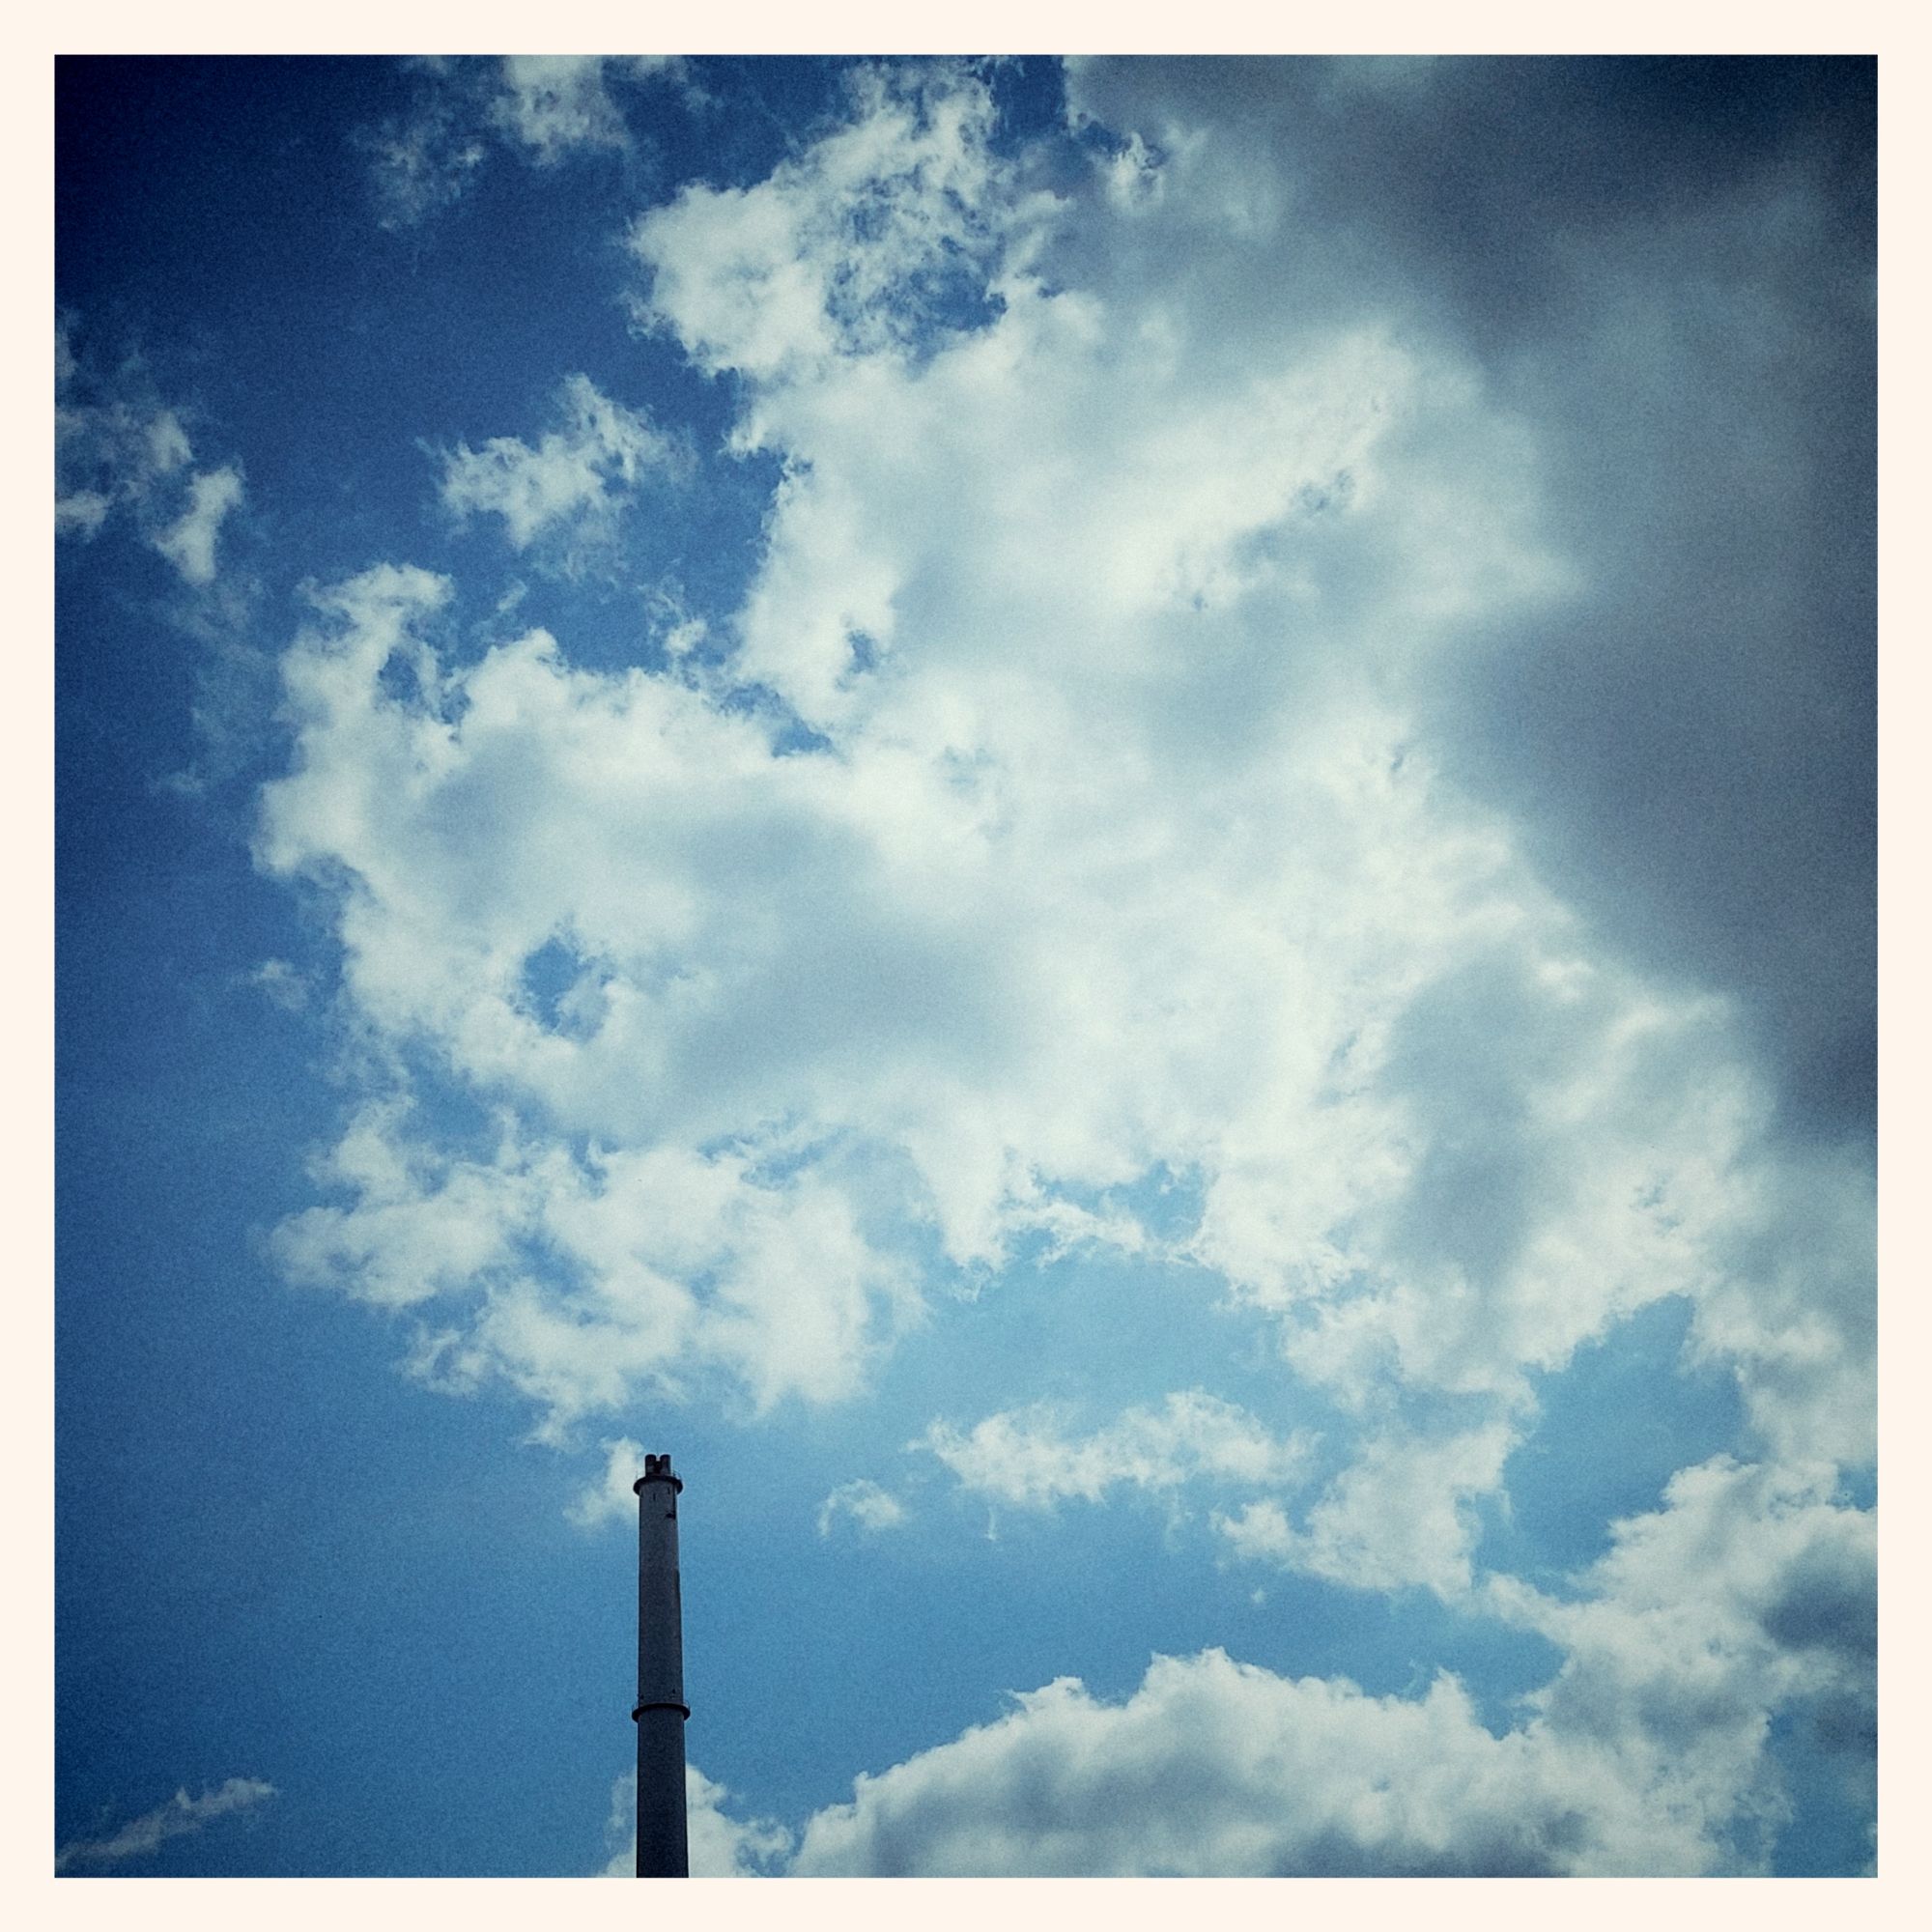 High clouds, blue sky and a factory chimney, elsewhere.